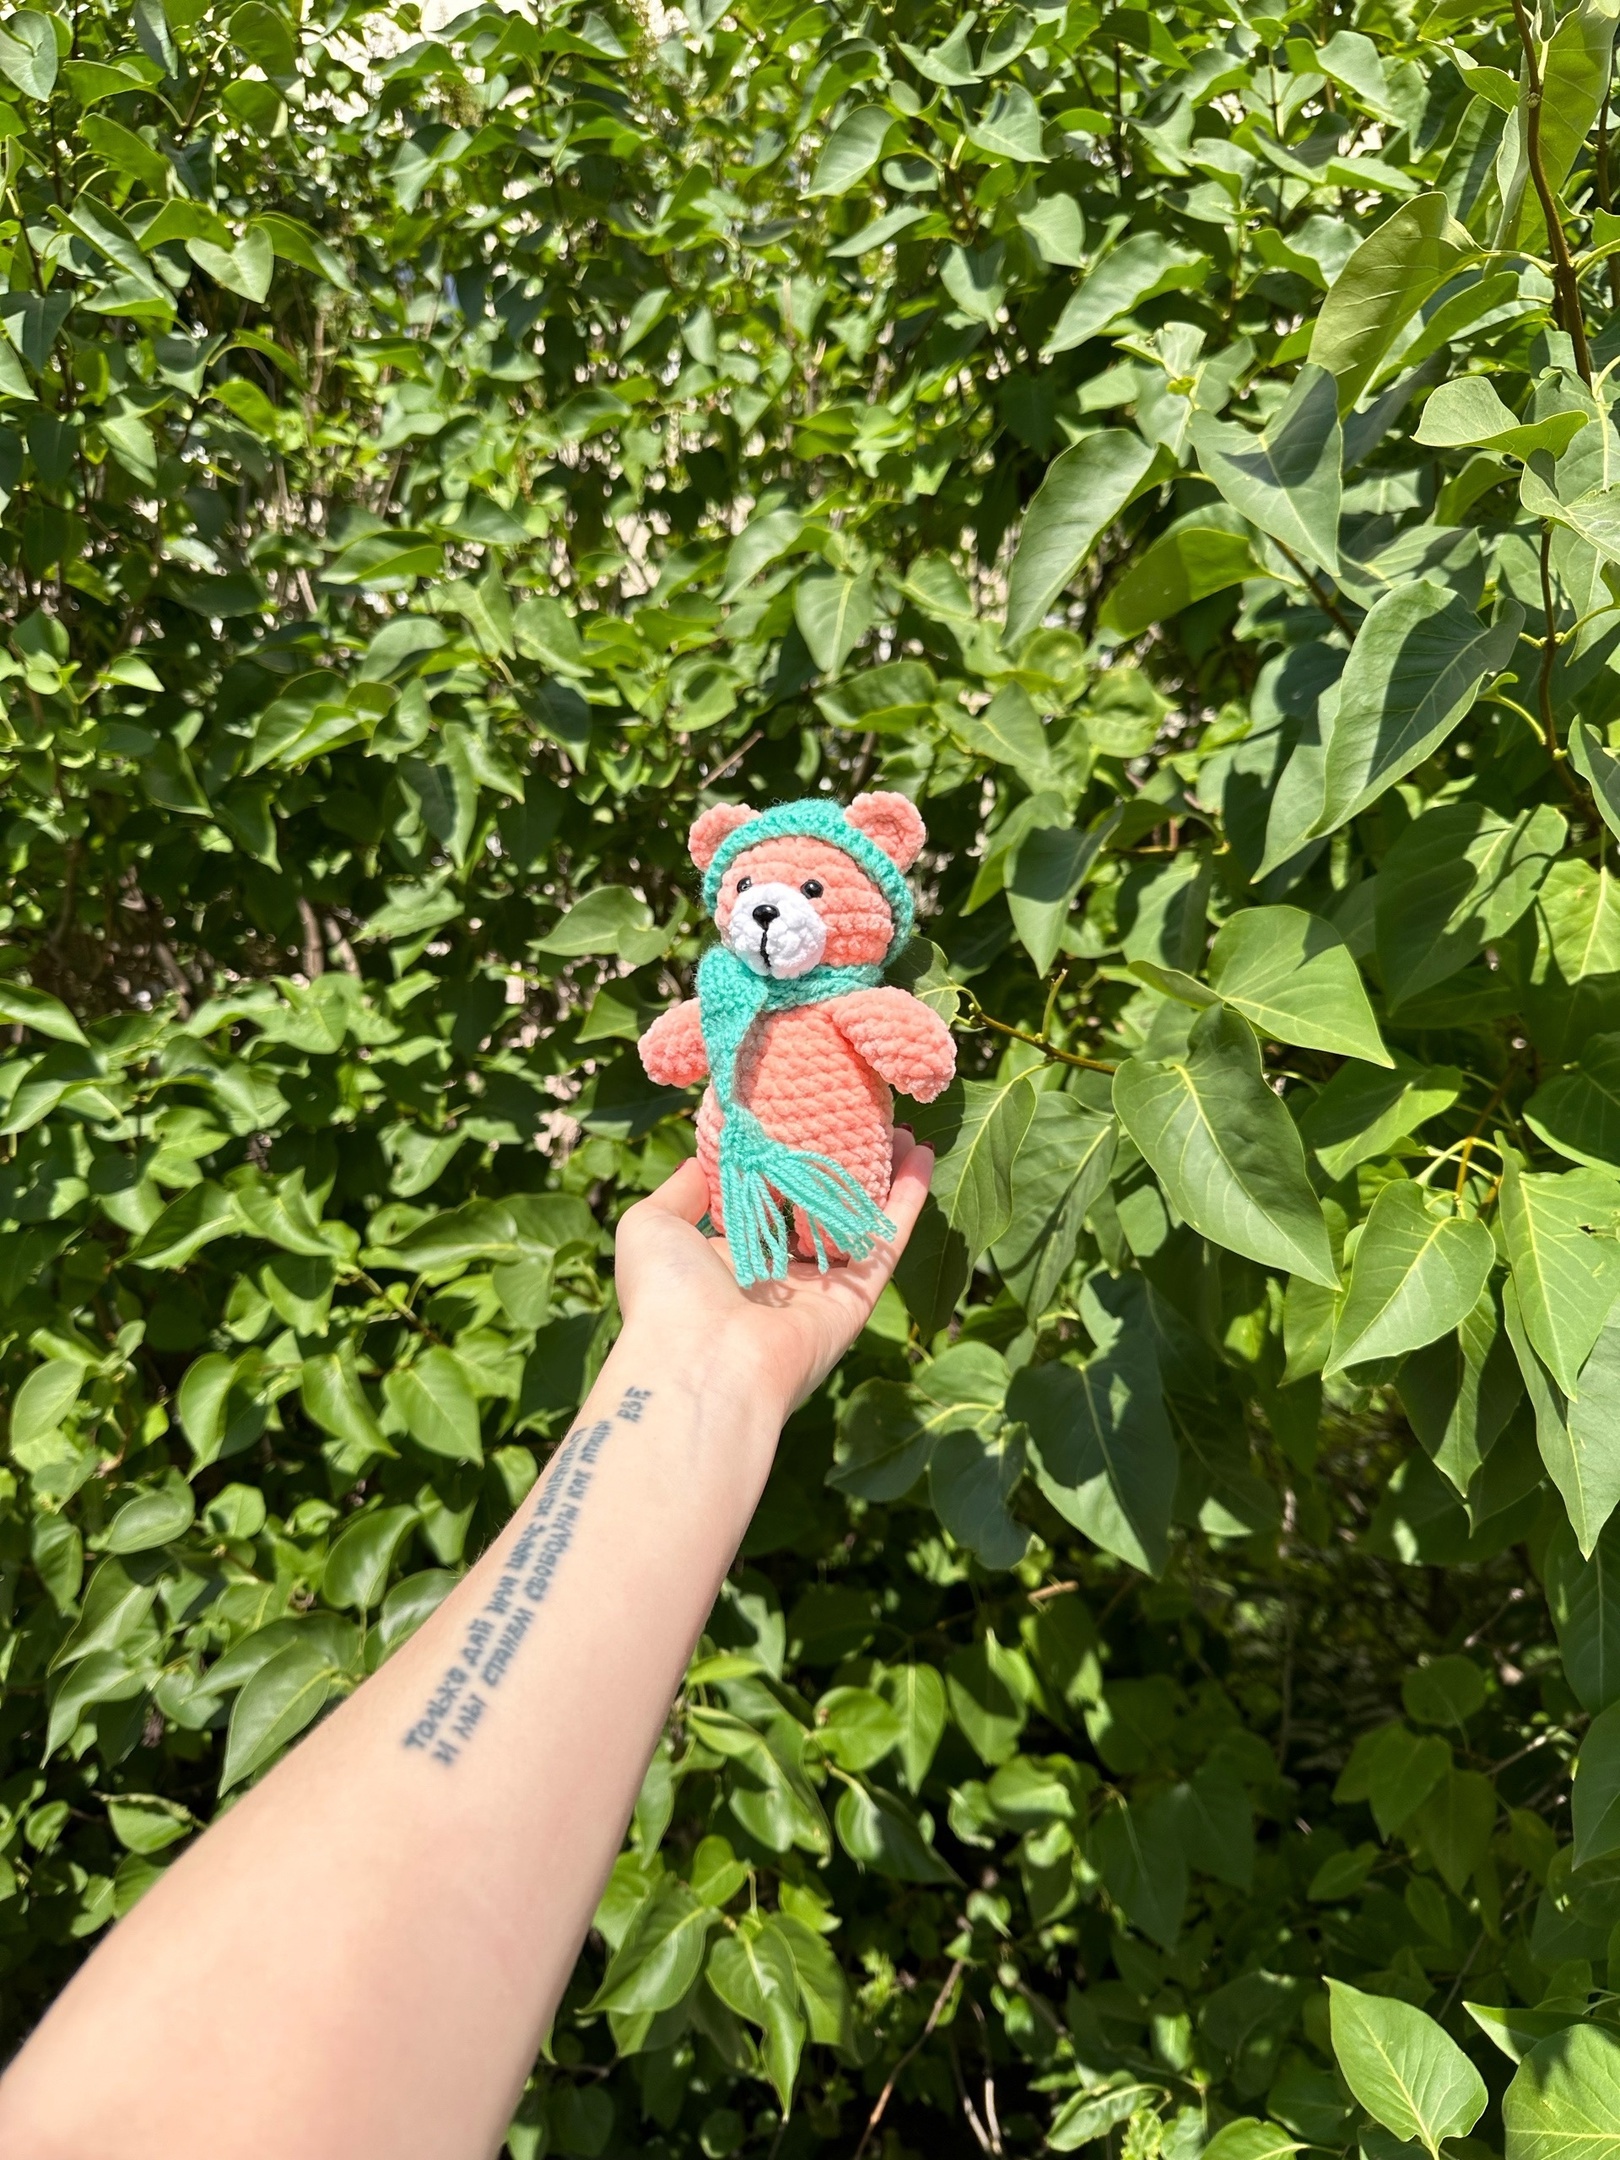 bear - My, Negative, Delivery, Post office, Knitting, Needlework, Needlework without process, Crochet, Amigurumi, With your own hands, The Bears, Author's toy, Plush Toys, Knitted toys, Toys, Longpost